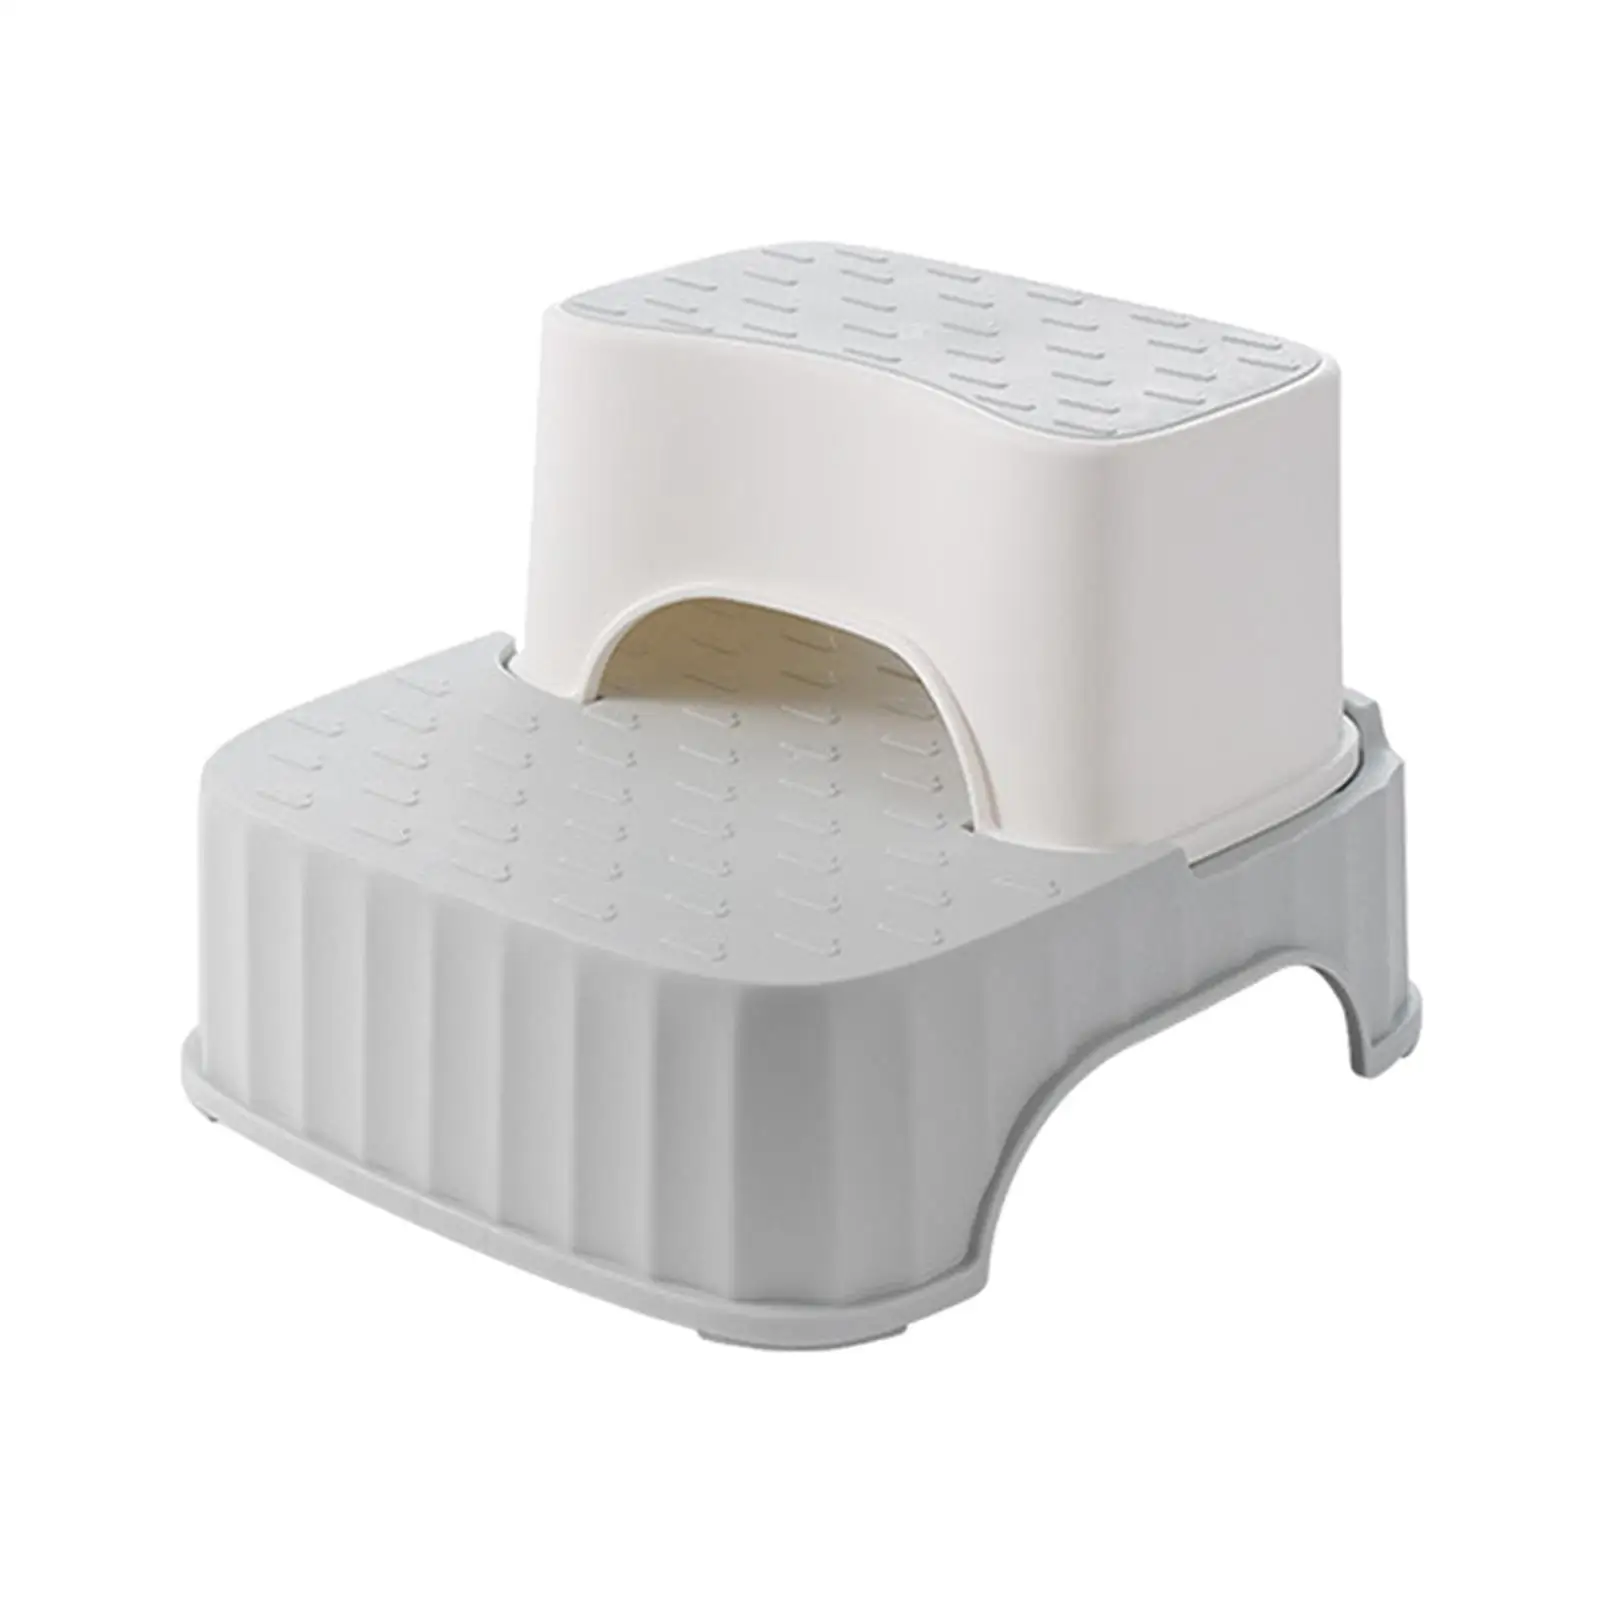 Compact Toilet Stool Bathroom Supplies Foot Rest Cushion Bedside Step Stool Non Skid Foot Stool for Home Bathroom Holiday Gifts